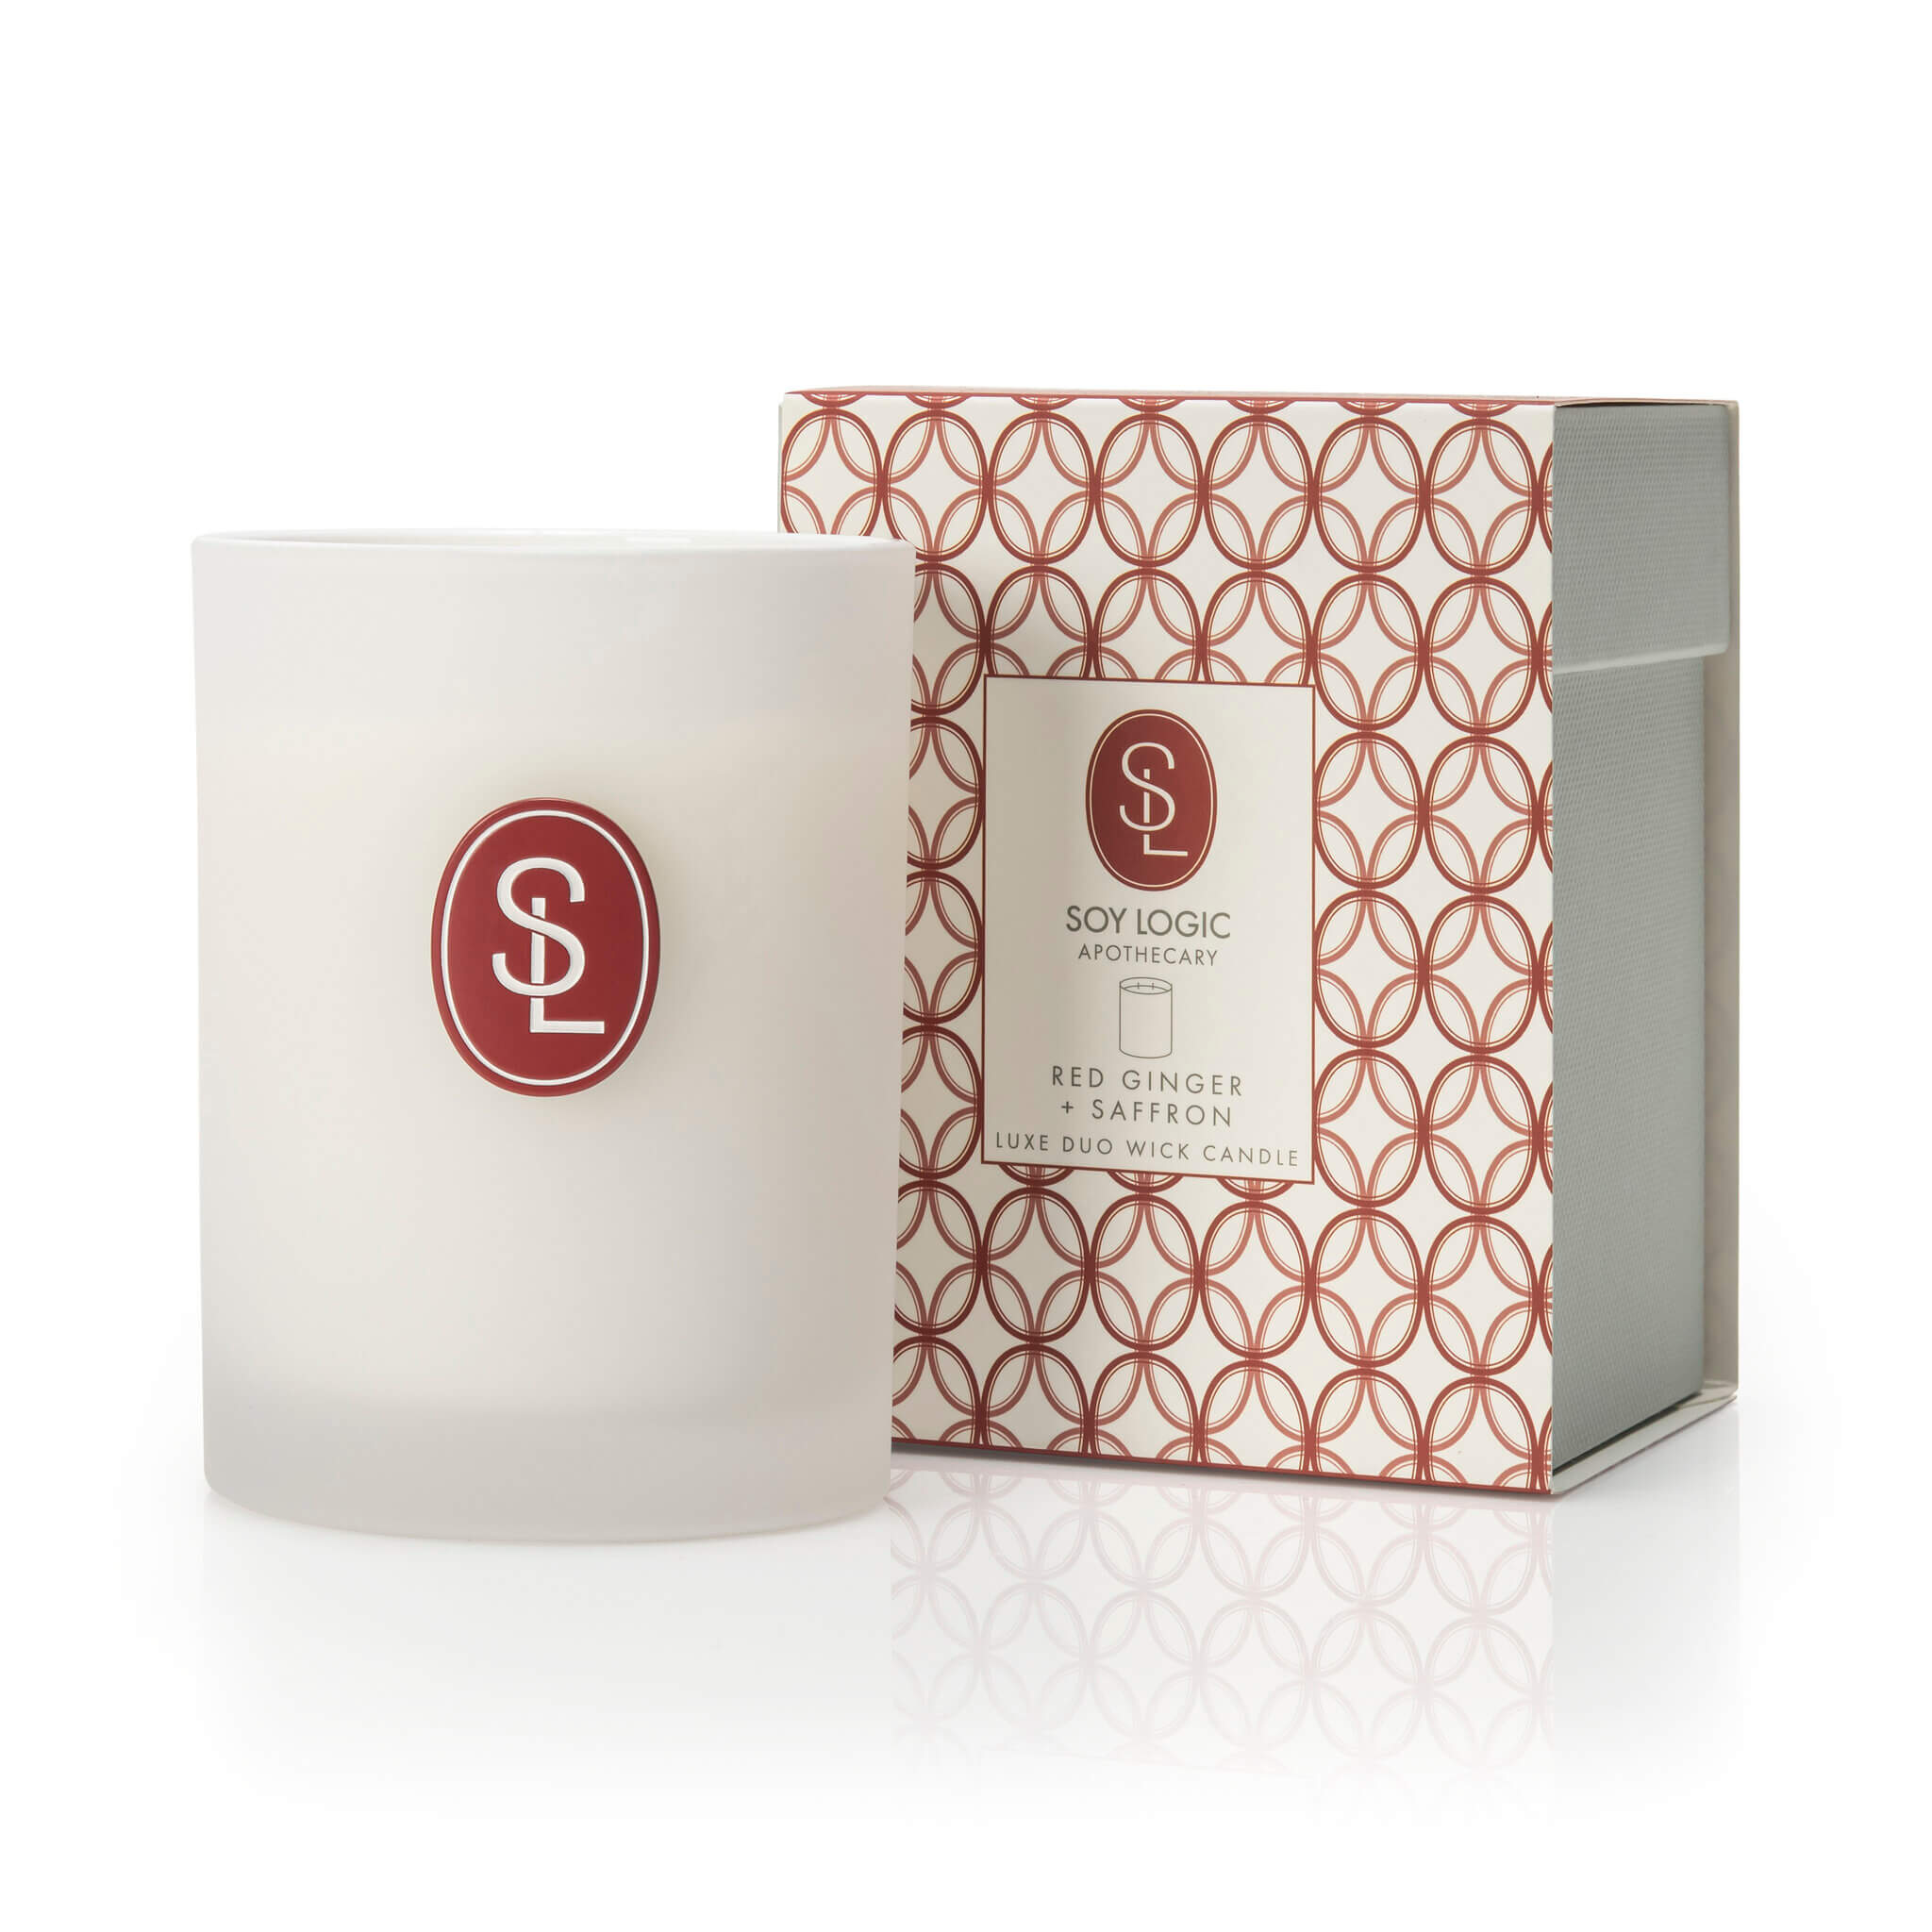 Red Ginger & Saffron Classic Duo Wick Candle